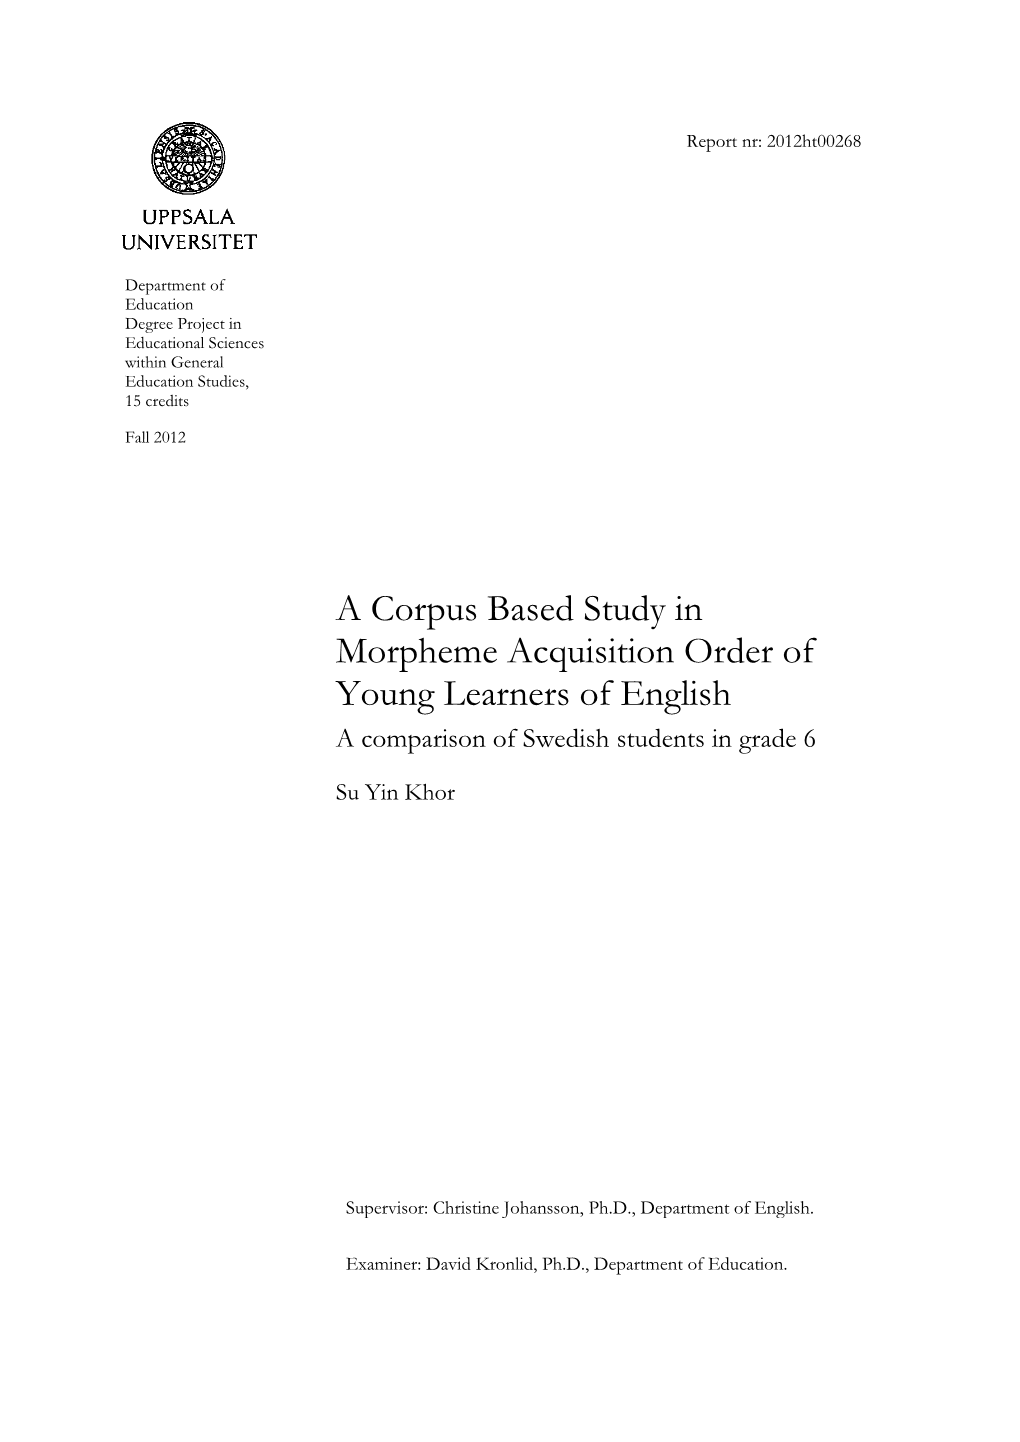 A Corpus Based Study in Morpheme Acquisition Order of Young Learners of English